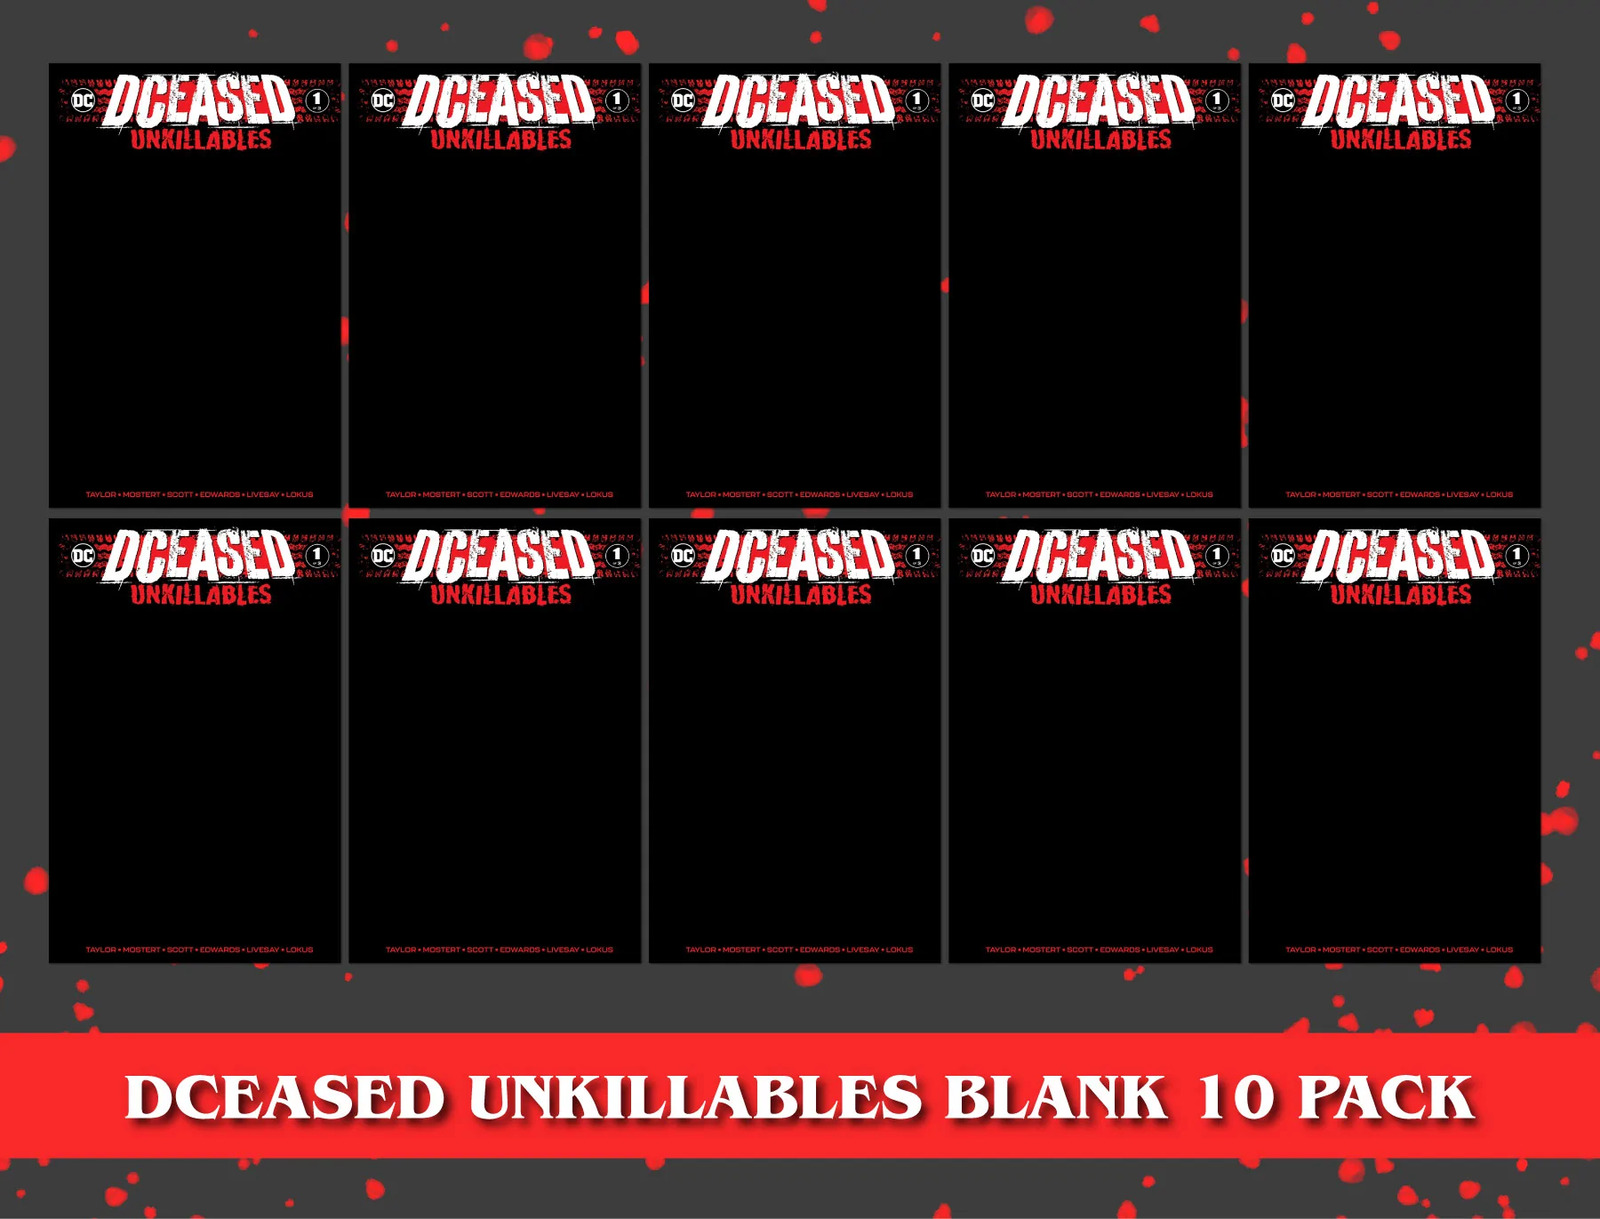 [10 PACK] DCEASED UNKILLABLES #1 (OF 3) UNKNOWN COMICS BLACK BLANK EXCLUSIVE VAR